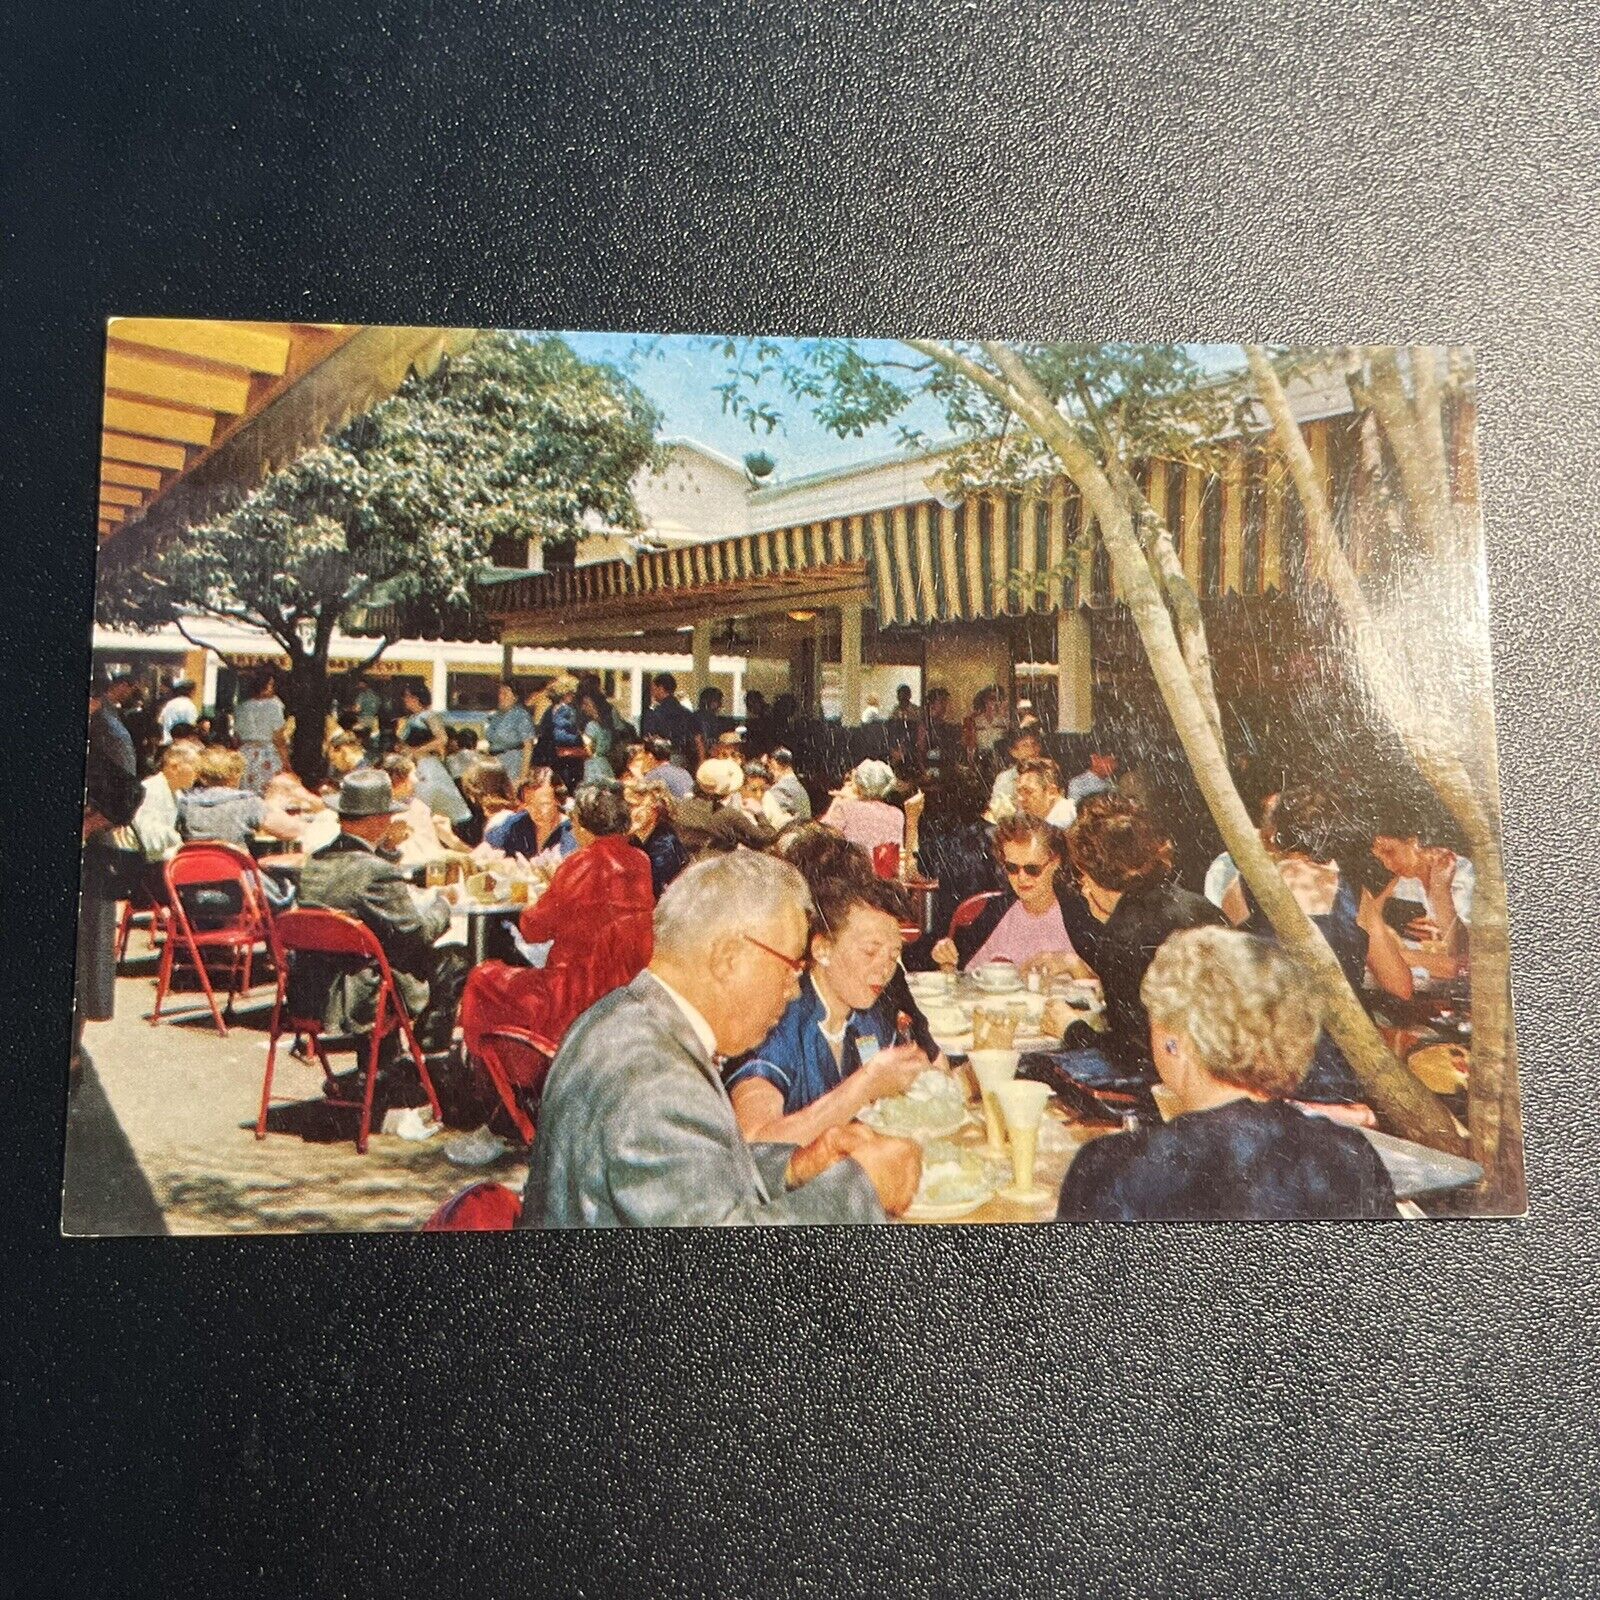 DR JIM STAMPS FARMERS MARKET LUNCH ON PATIO LOS ANGELES CALIFORNIA POSTCARD